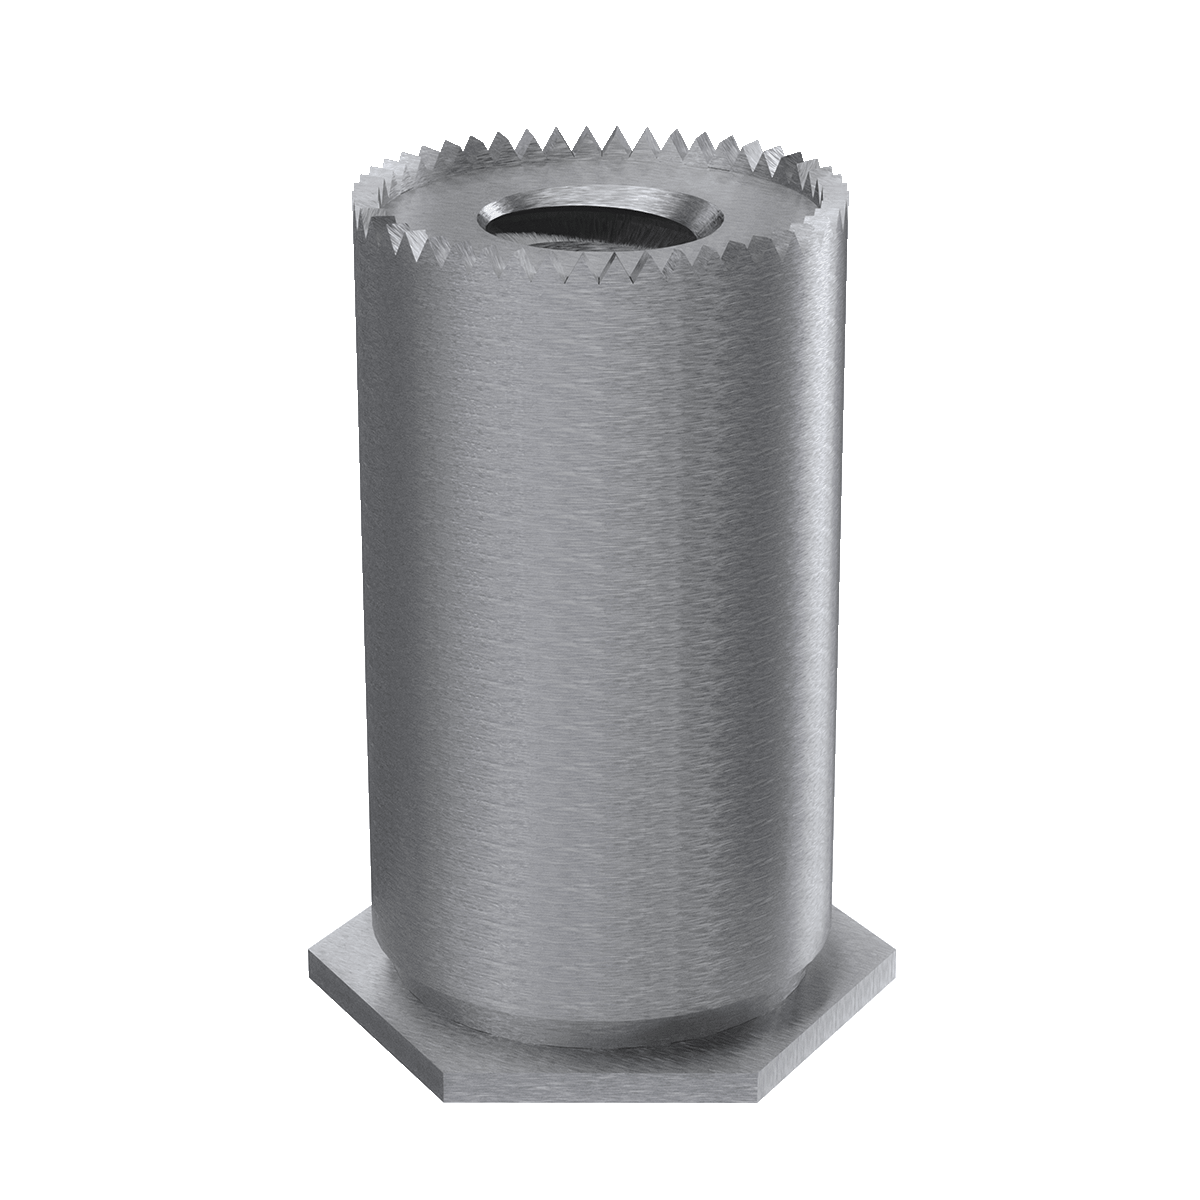 Self-Clinching Standoff, Self-Grounding, 300 Series Stainless Steel, Passivated, M3x0.5 x 12, 100 Pack